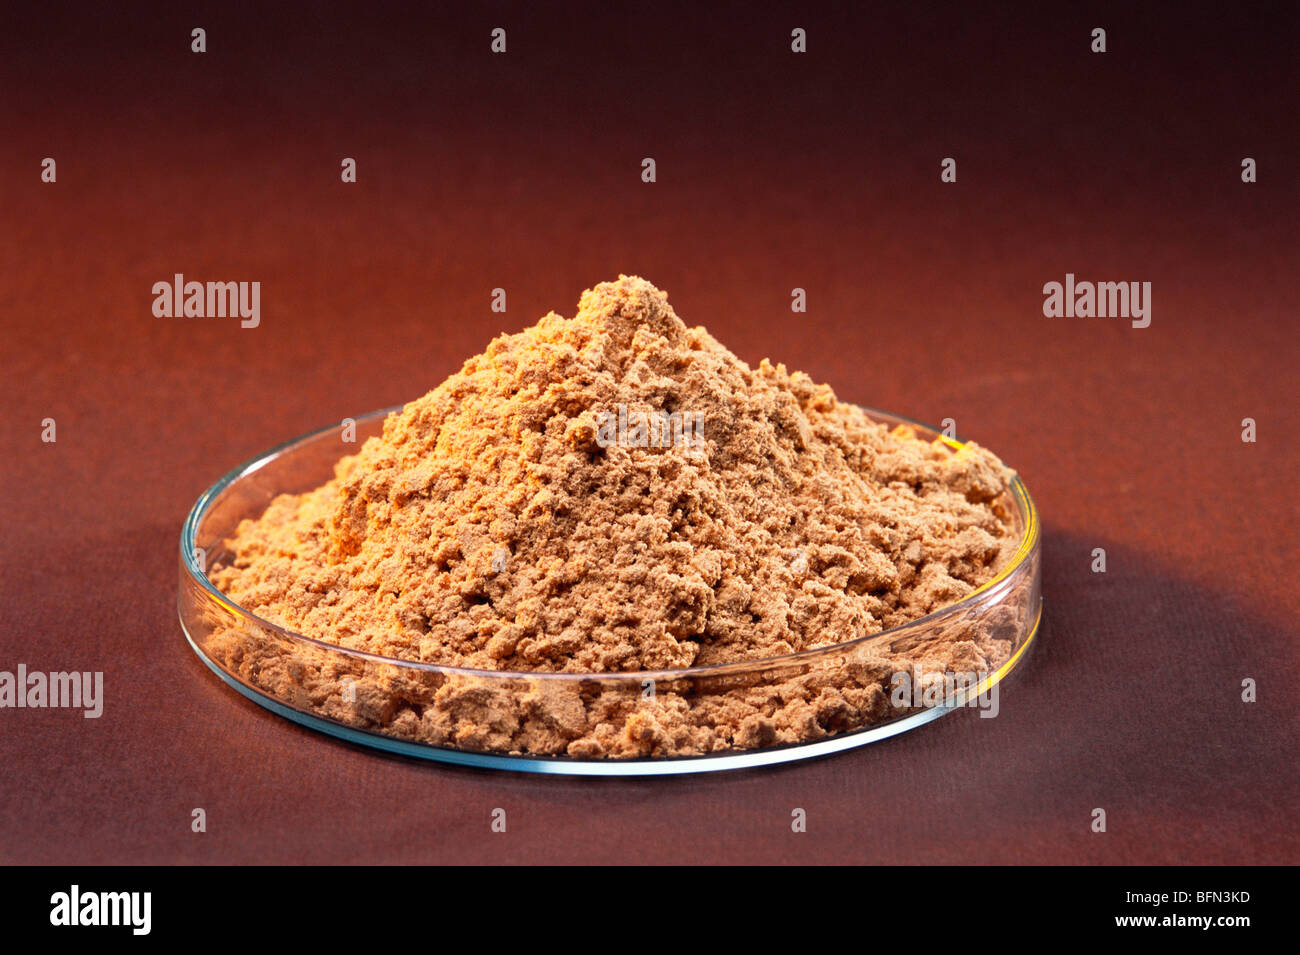 sandalwood powder in glass plate on maroon background Stock Photo